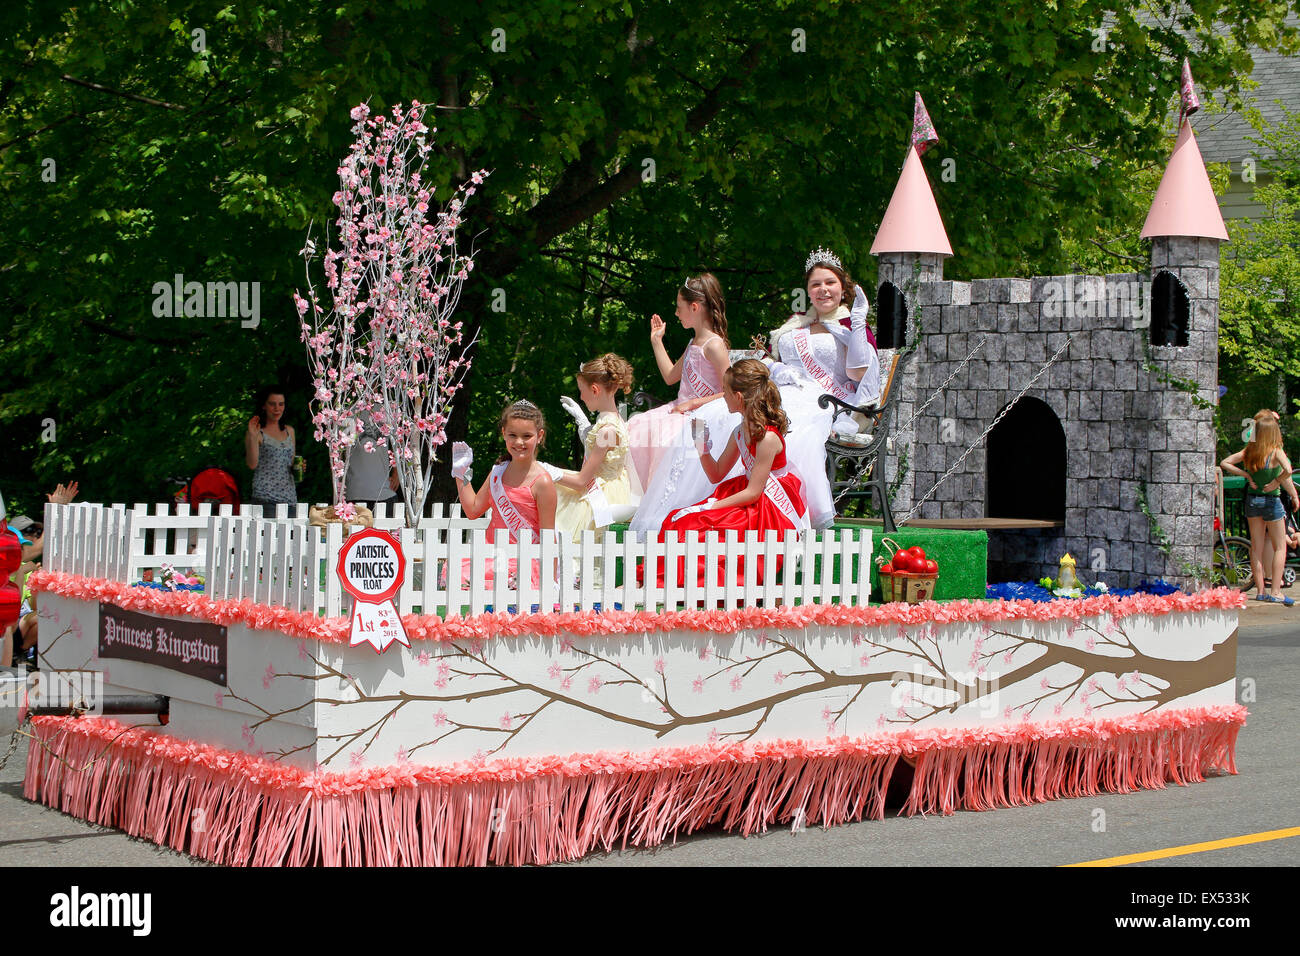 83rd Queen Annapolisa float in the Annapolis Valley Apple Blossom Festival parade in Kentville, Nova Scotia, Canada, 2015 Stock Photo